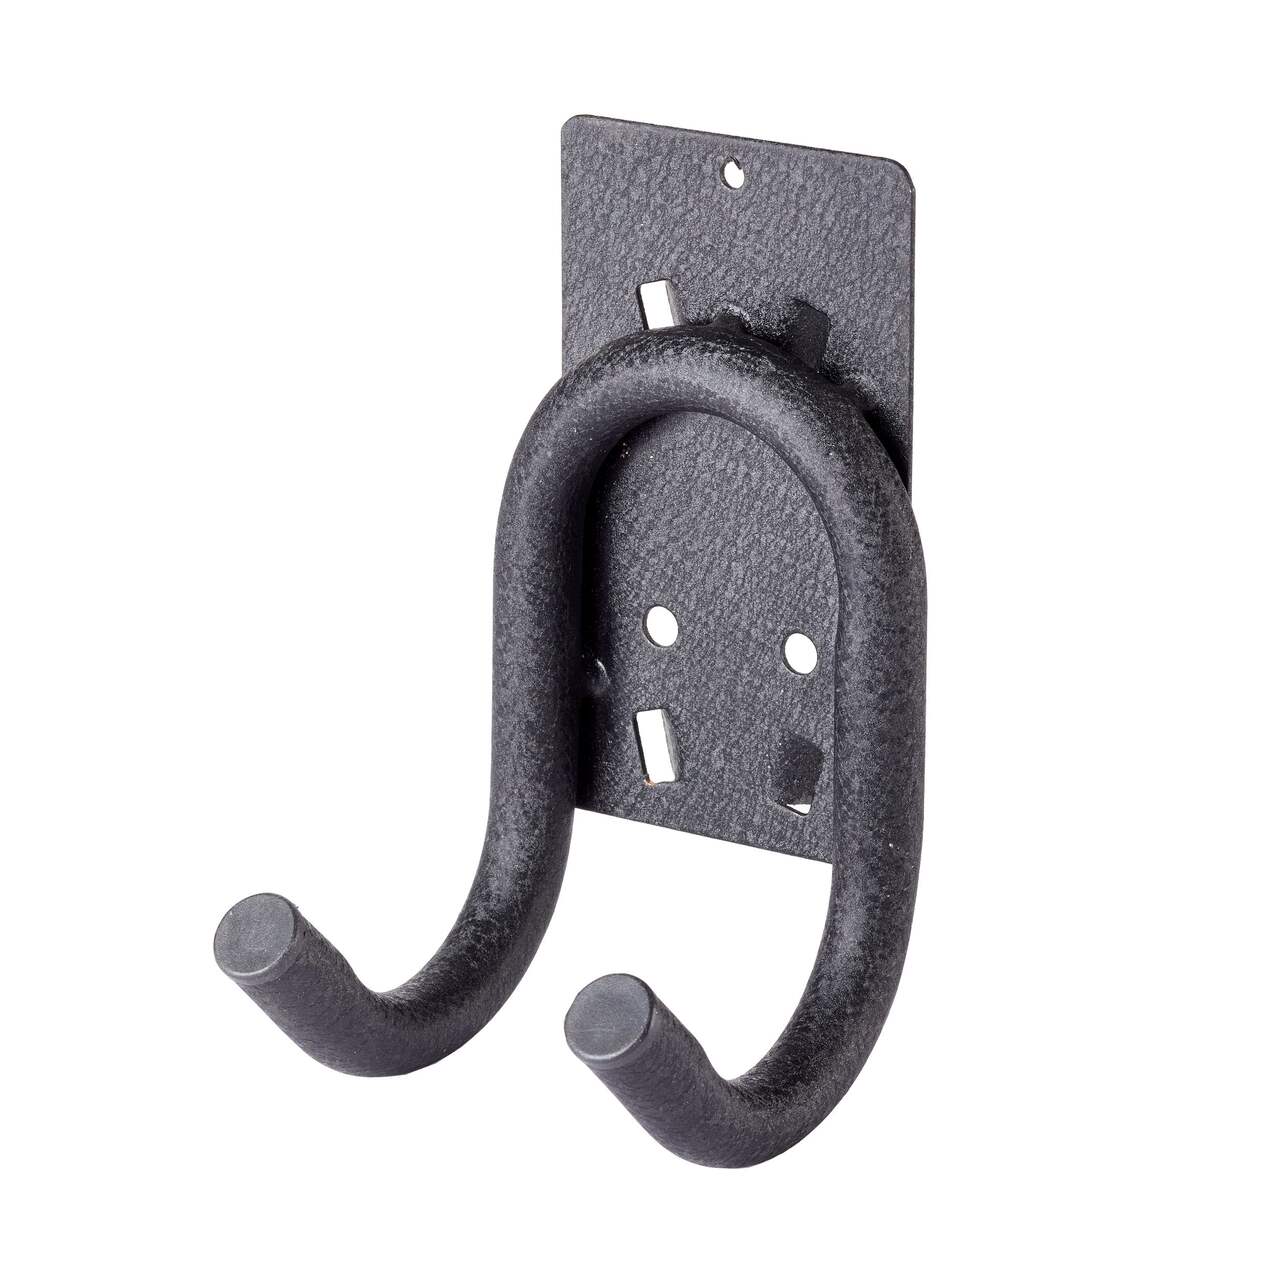 MAXIMUM Double Storage Hook, For Heavy Duty Steel Rack / Shelving or Wall  Mount, Up to 50-kgs